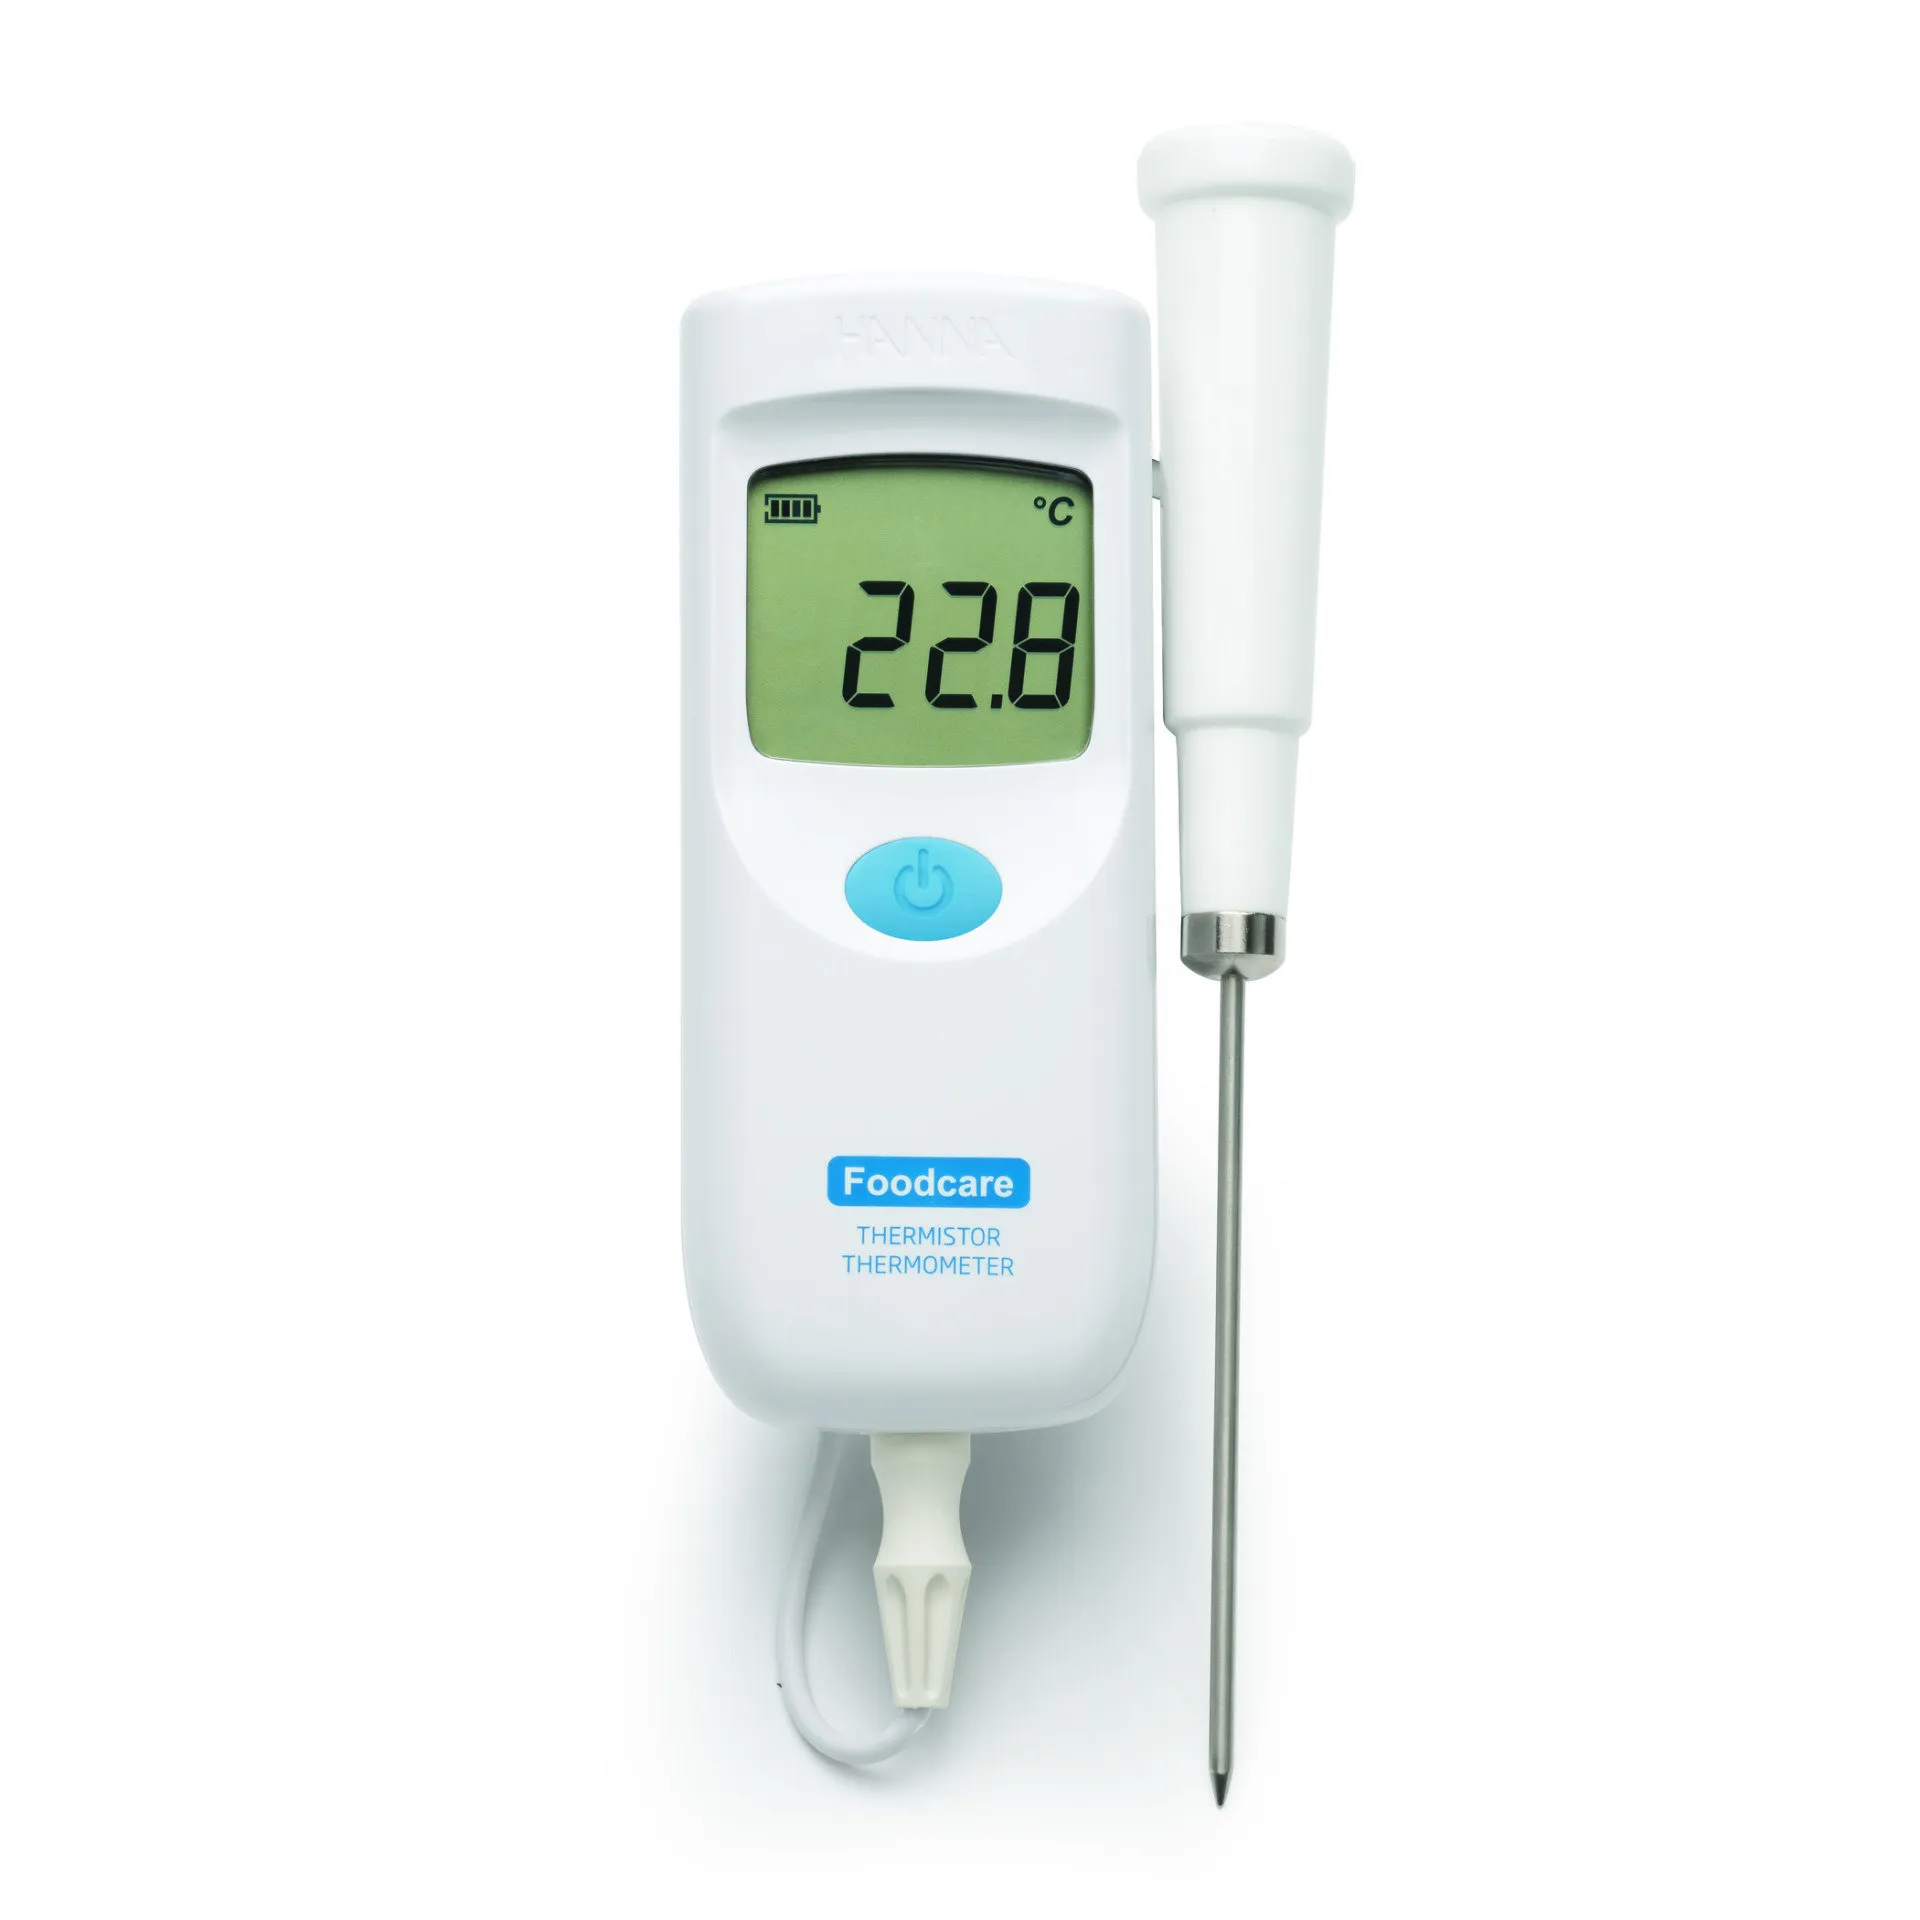 Foodcare digital food Thermometer for taking temperature of food and liquids